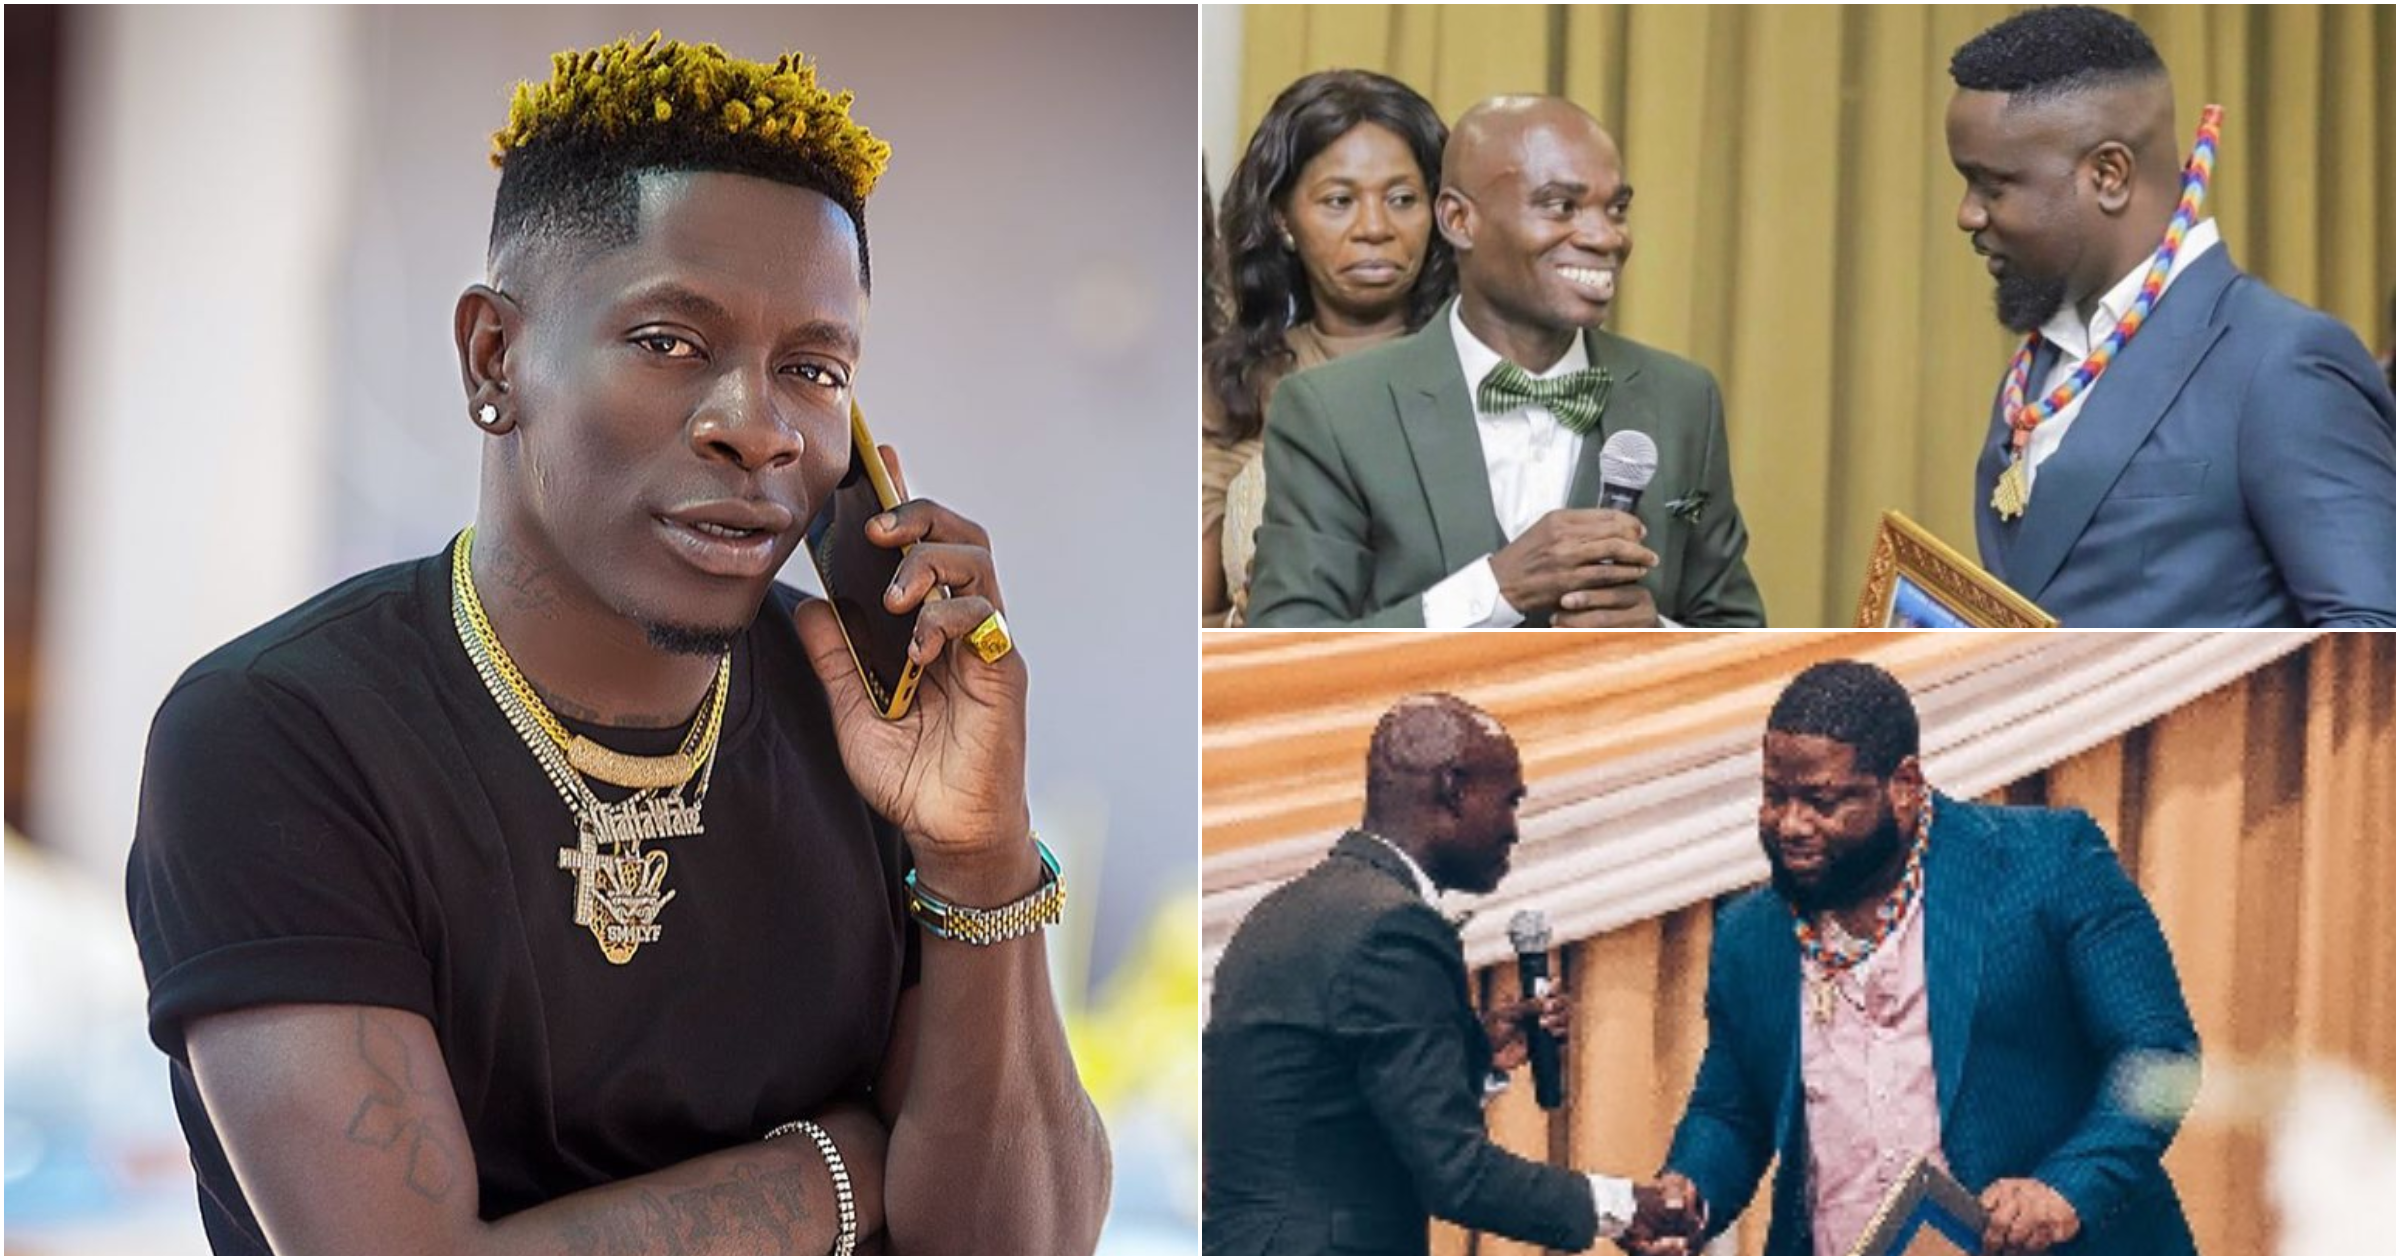 Dr UN: Shatta Wale claims Sarkodie, others paid GHC1000; D-Black paid GHC5000 for awards